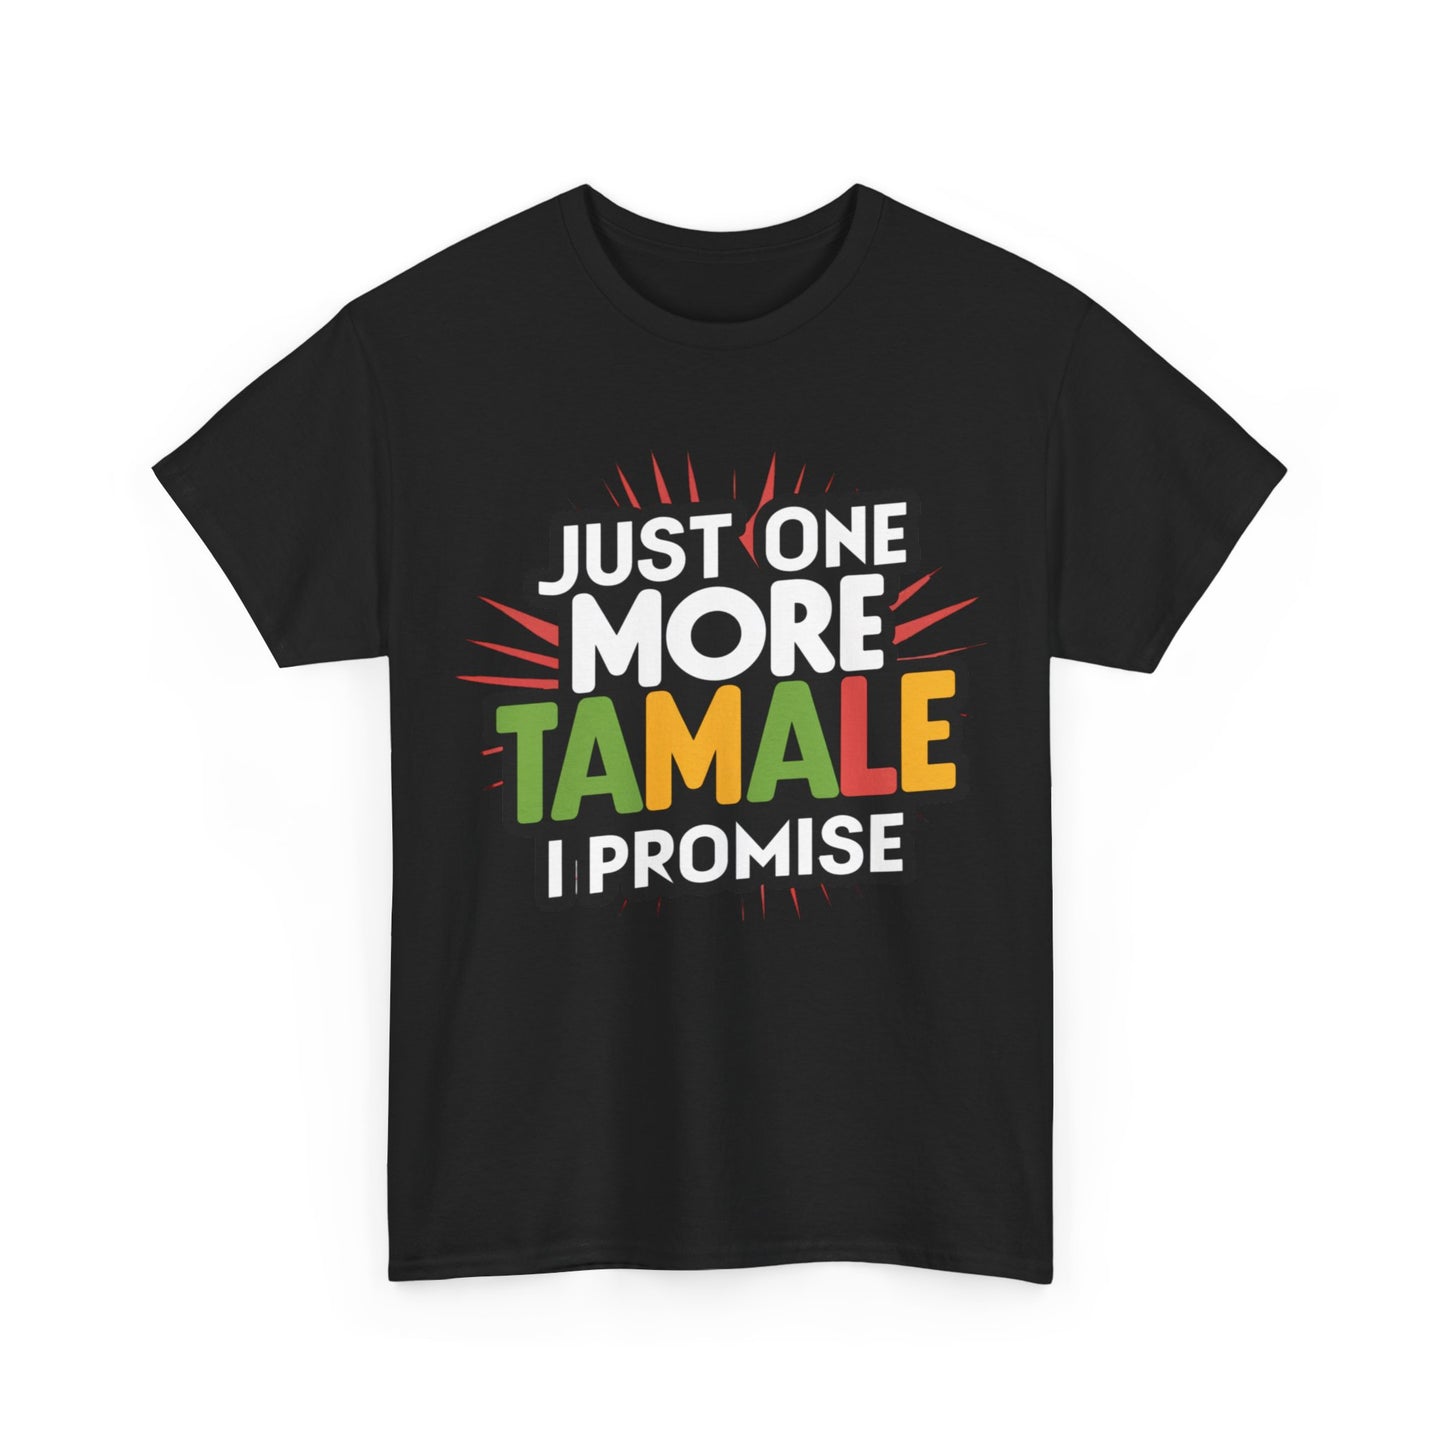 Just One More Tamale I Promise Mexican Food Graphic Unisex Heavy Cotton Tee Cotton Funny Humorous Graphic Soft Premium Unisex Men Women Black T-shirt Birthday Gift-15